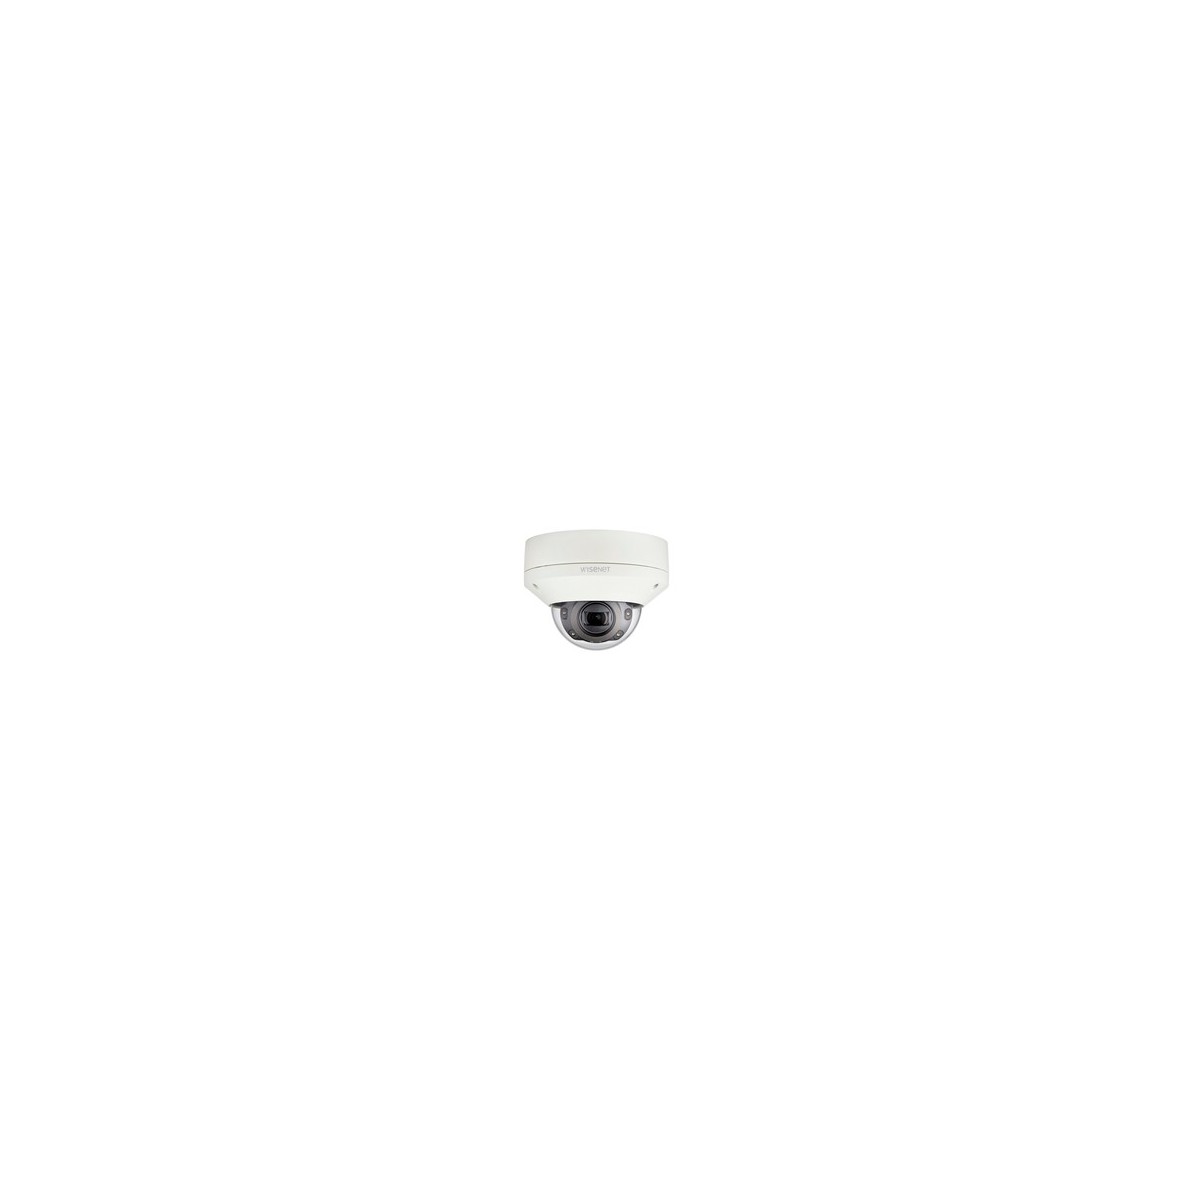 Hanwha Techwin Hanwha XNV-6080R - IP security camera - Indoor  outdoor - Wired - Digital PTZ - Simplified Chinese - Traditional 